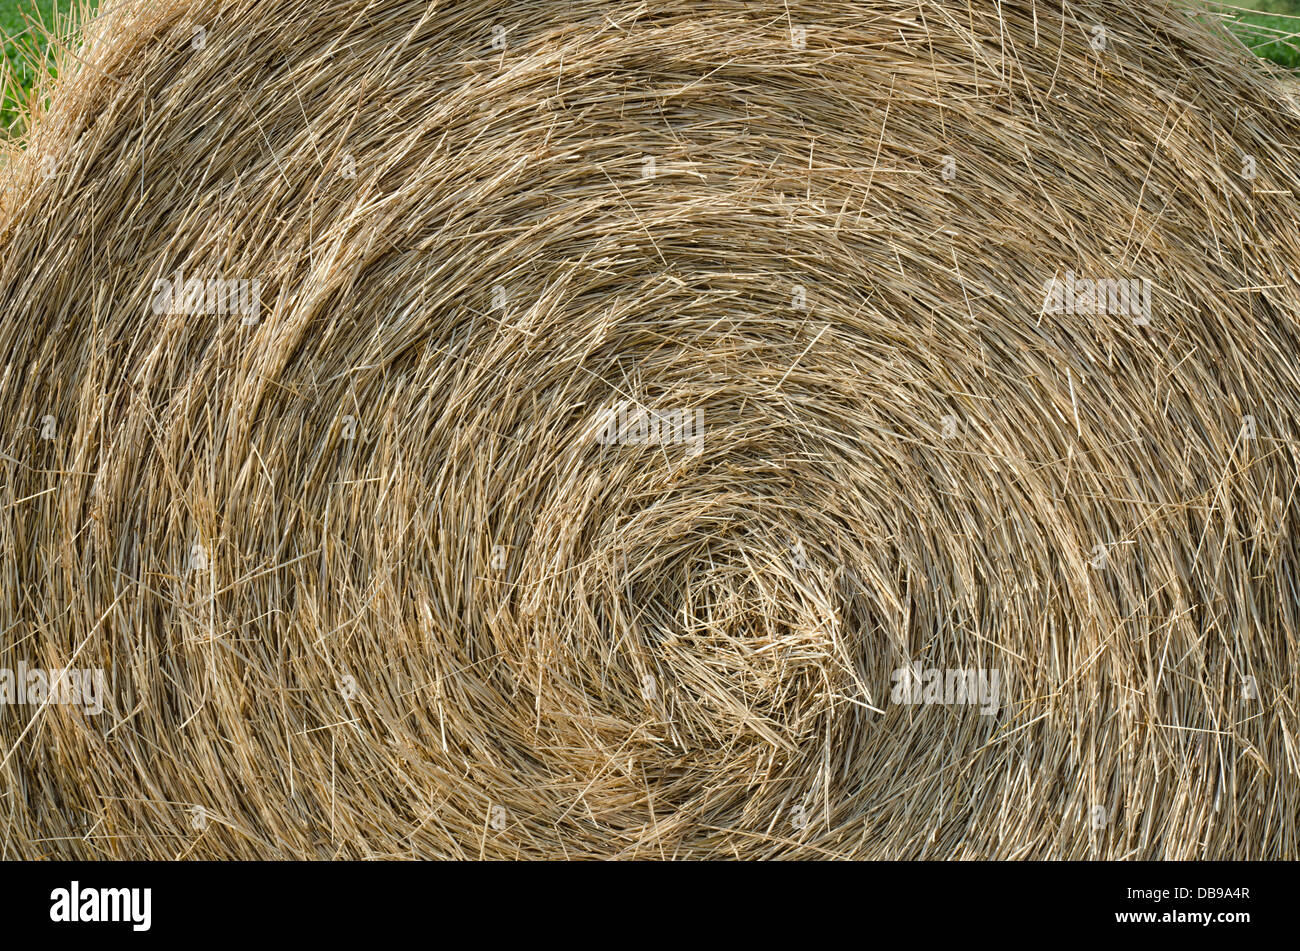 Close up of a hay bale Stock Photo